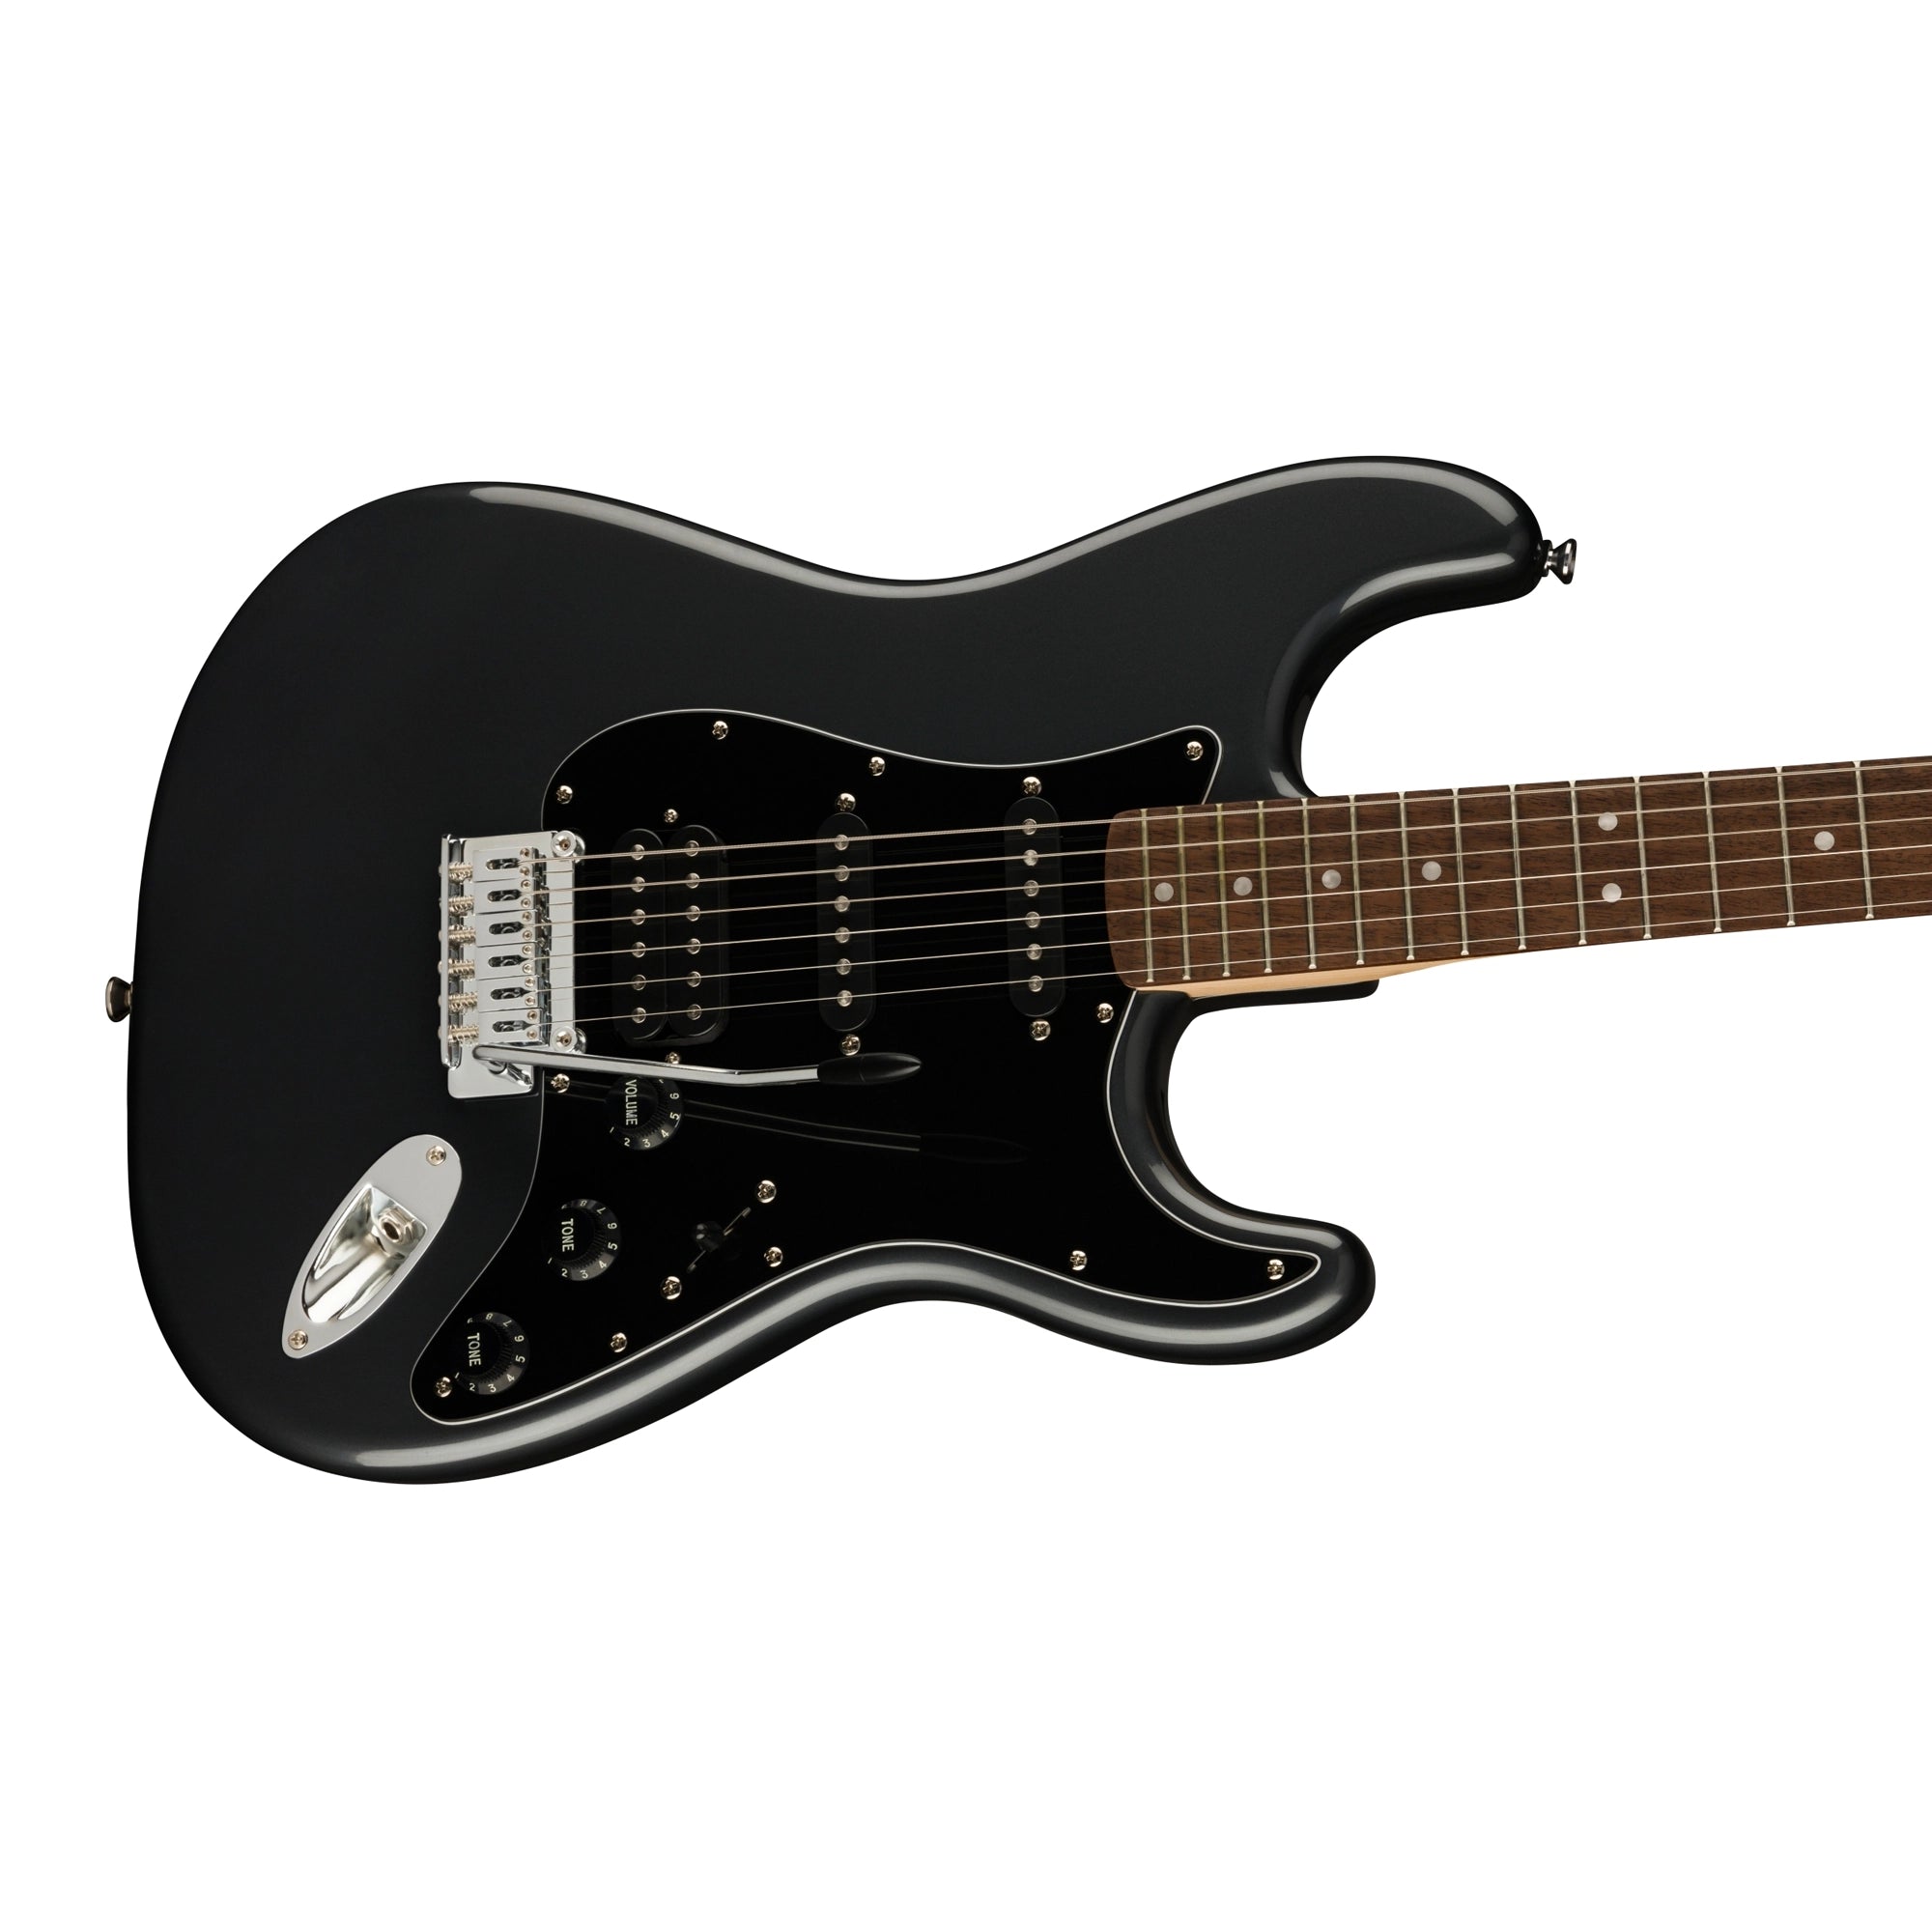 Squier Affinity Series Stratocaster Hss Pack - Charcoal Frost Metallic